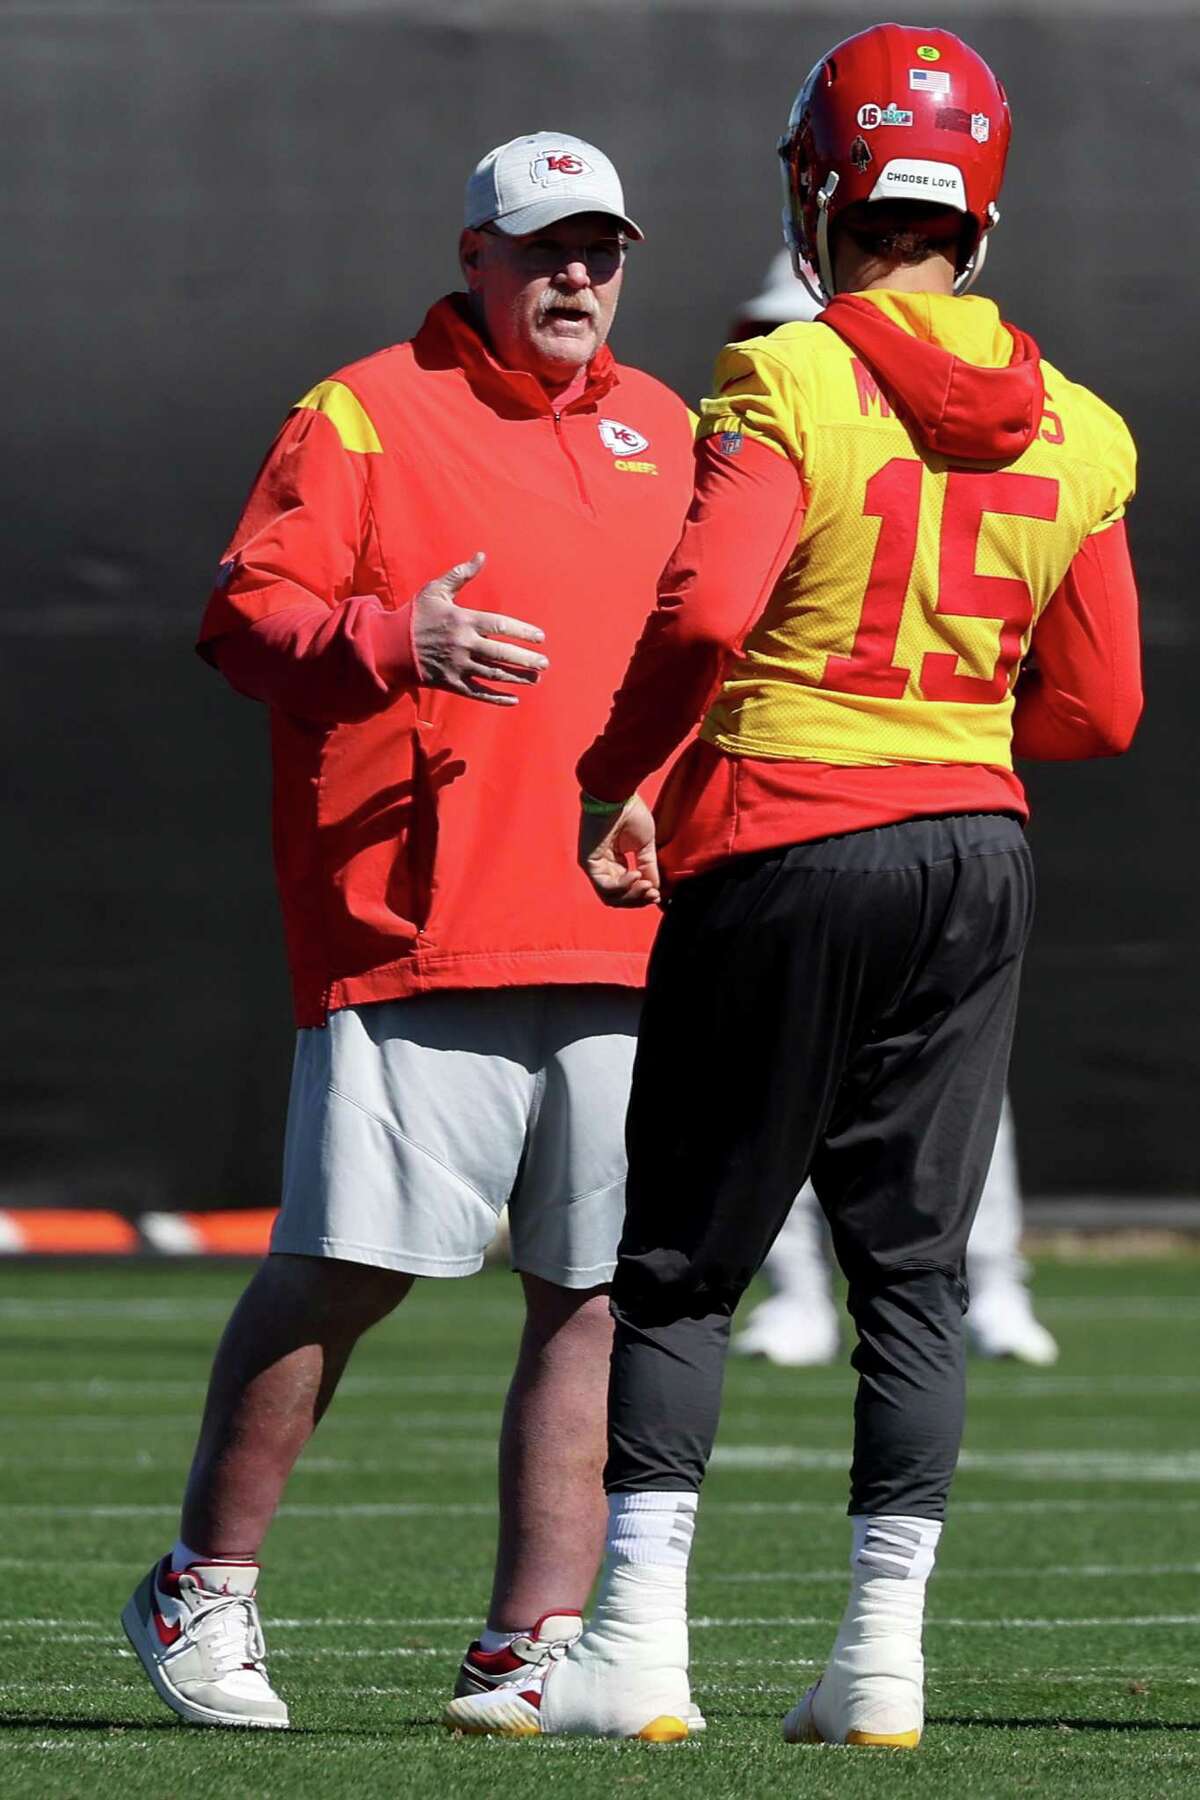 Head coach Andy Reid and quarterback Patrick Mahomes of the Chiefs are aiming to win their second Super Bowl championship in four seasons.